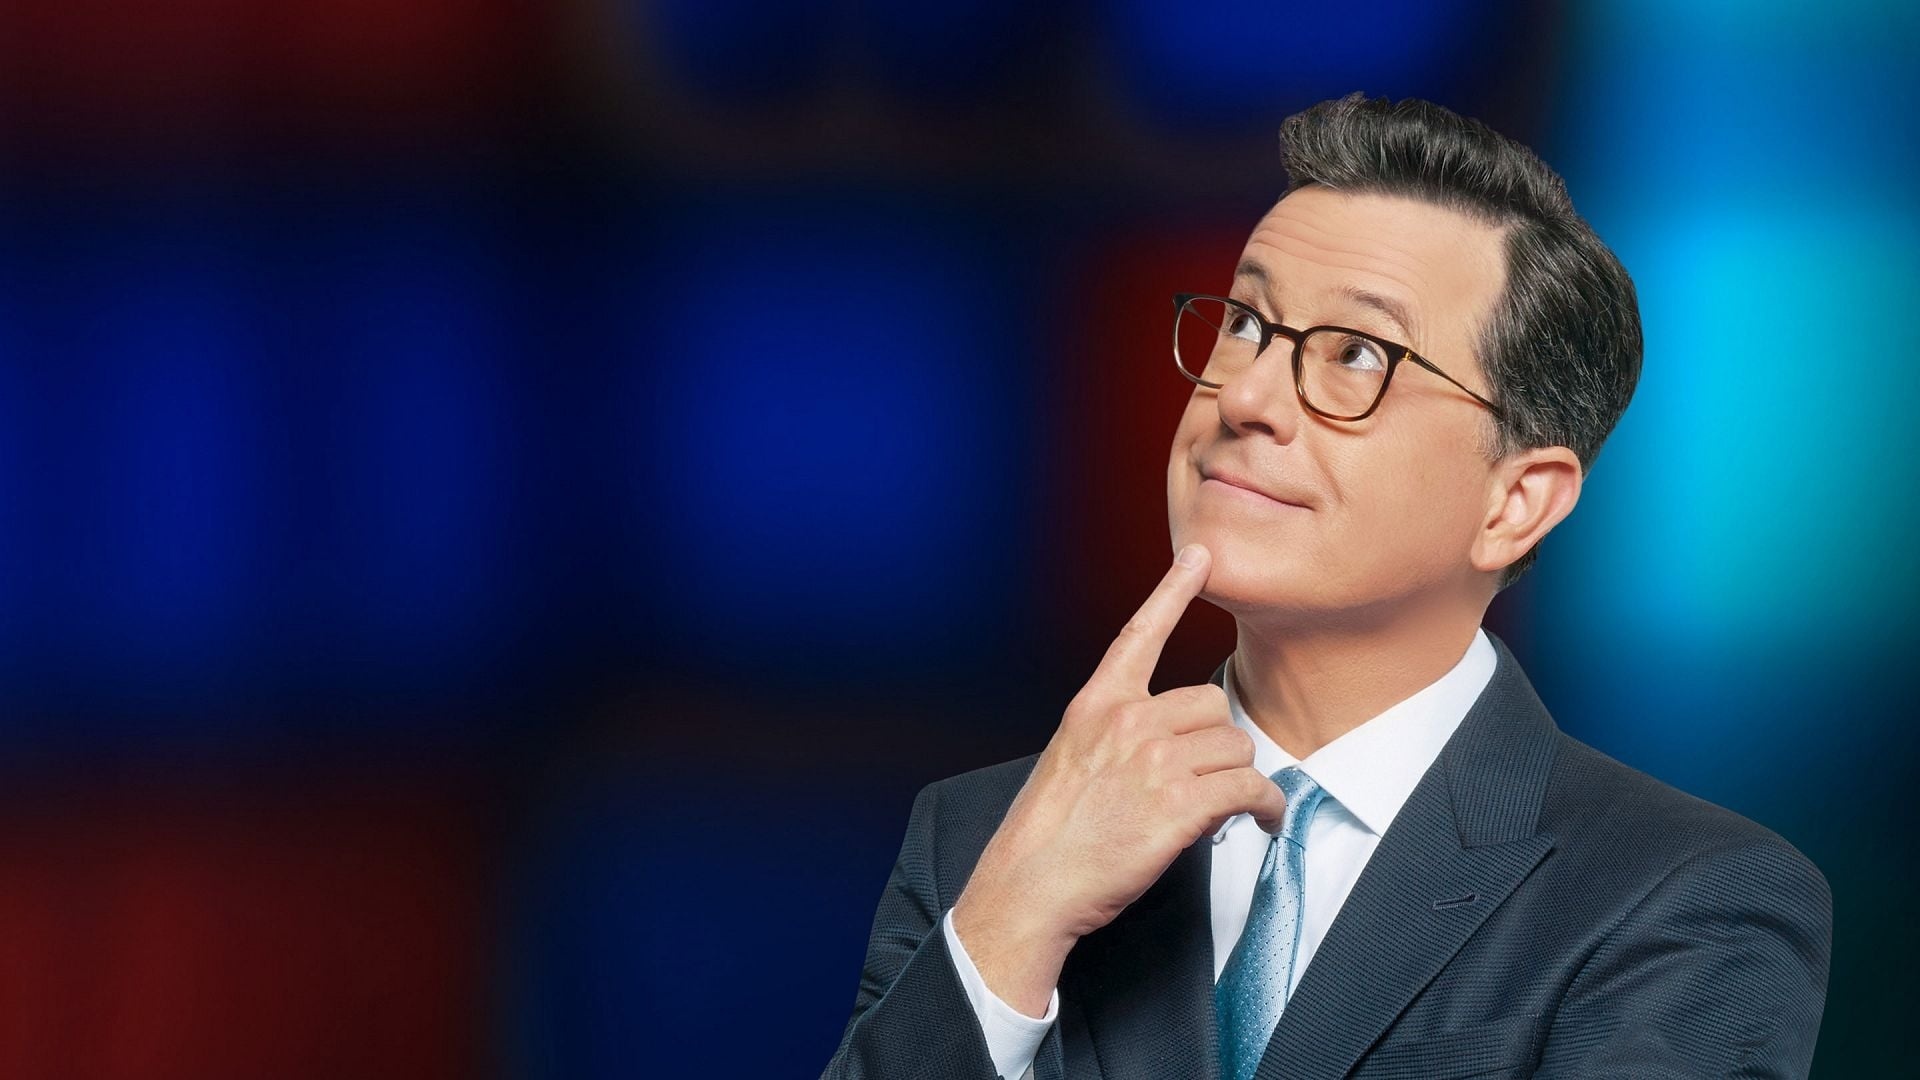 Late Show with Stephen Colbert, TV series backdrop, 2015 release, Entertainment database, 1920x1080 Full HD Desktop